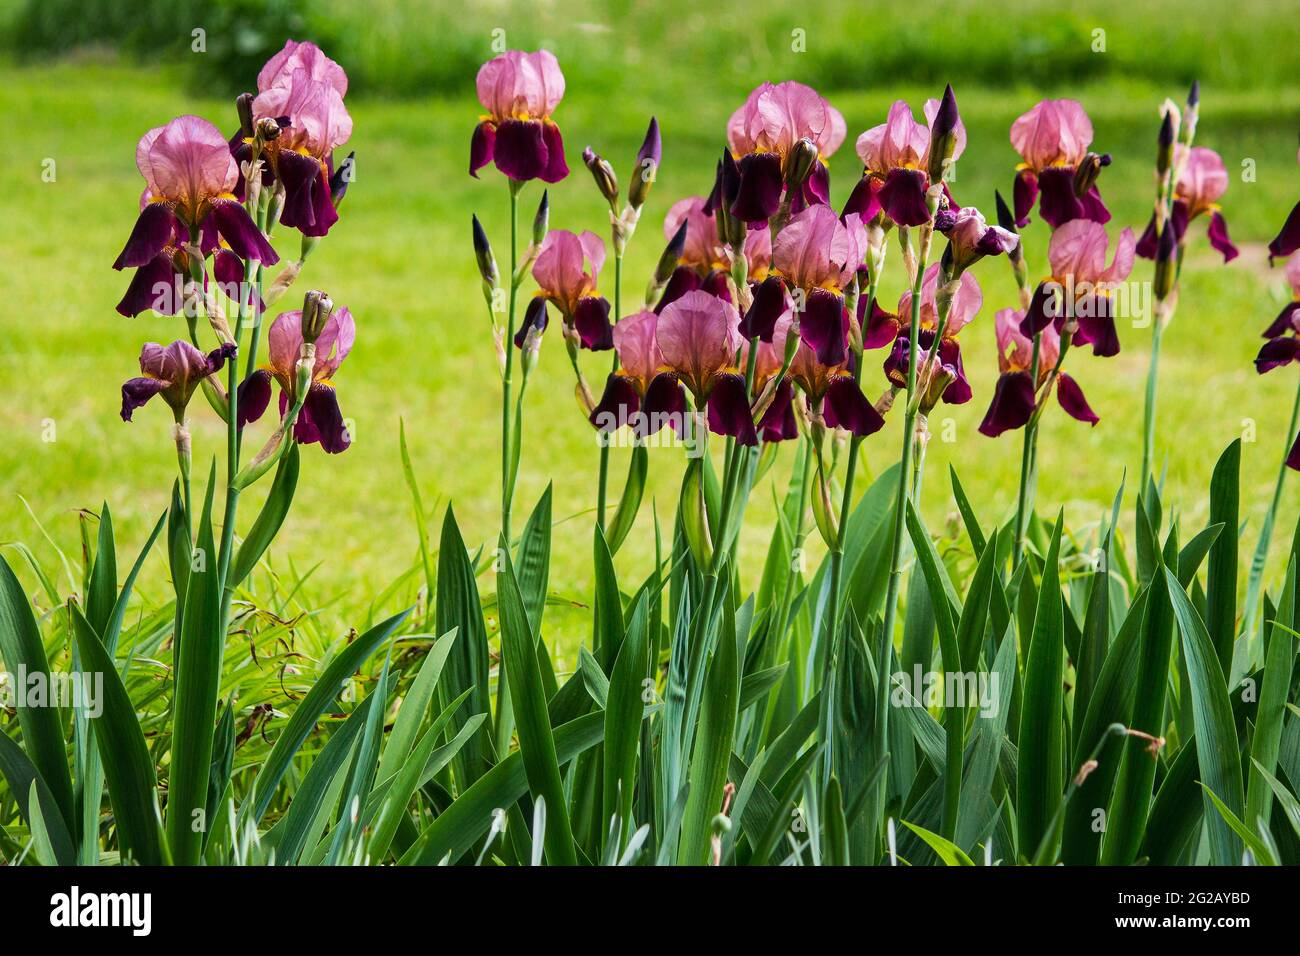 Blooming irises on a flower bed in the garden Stock Photo